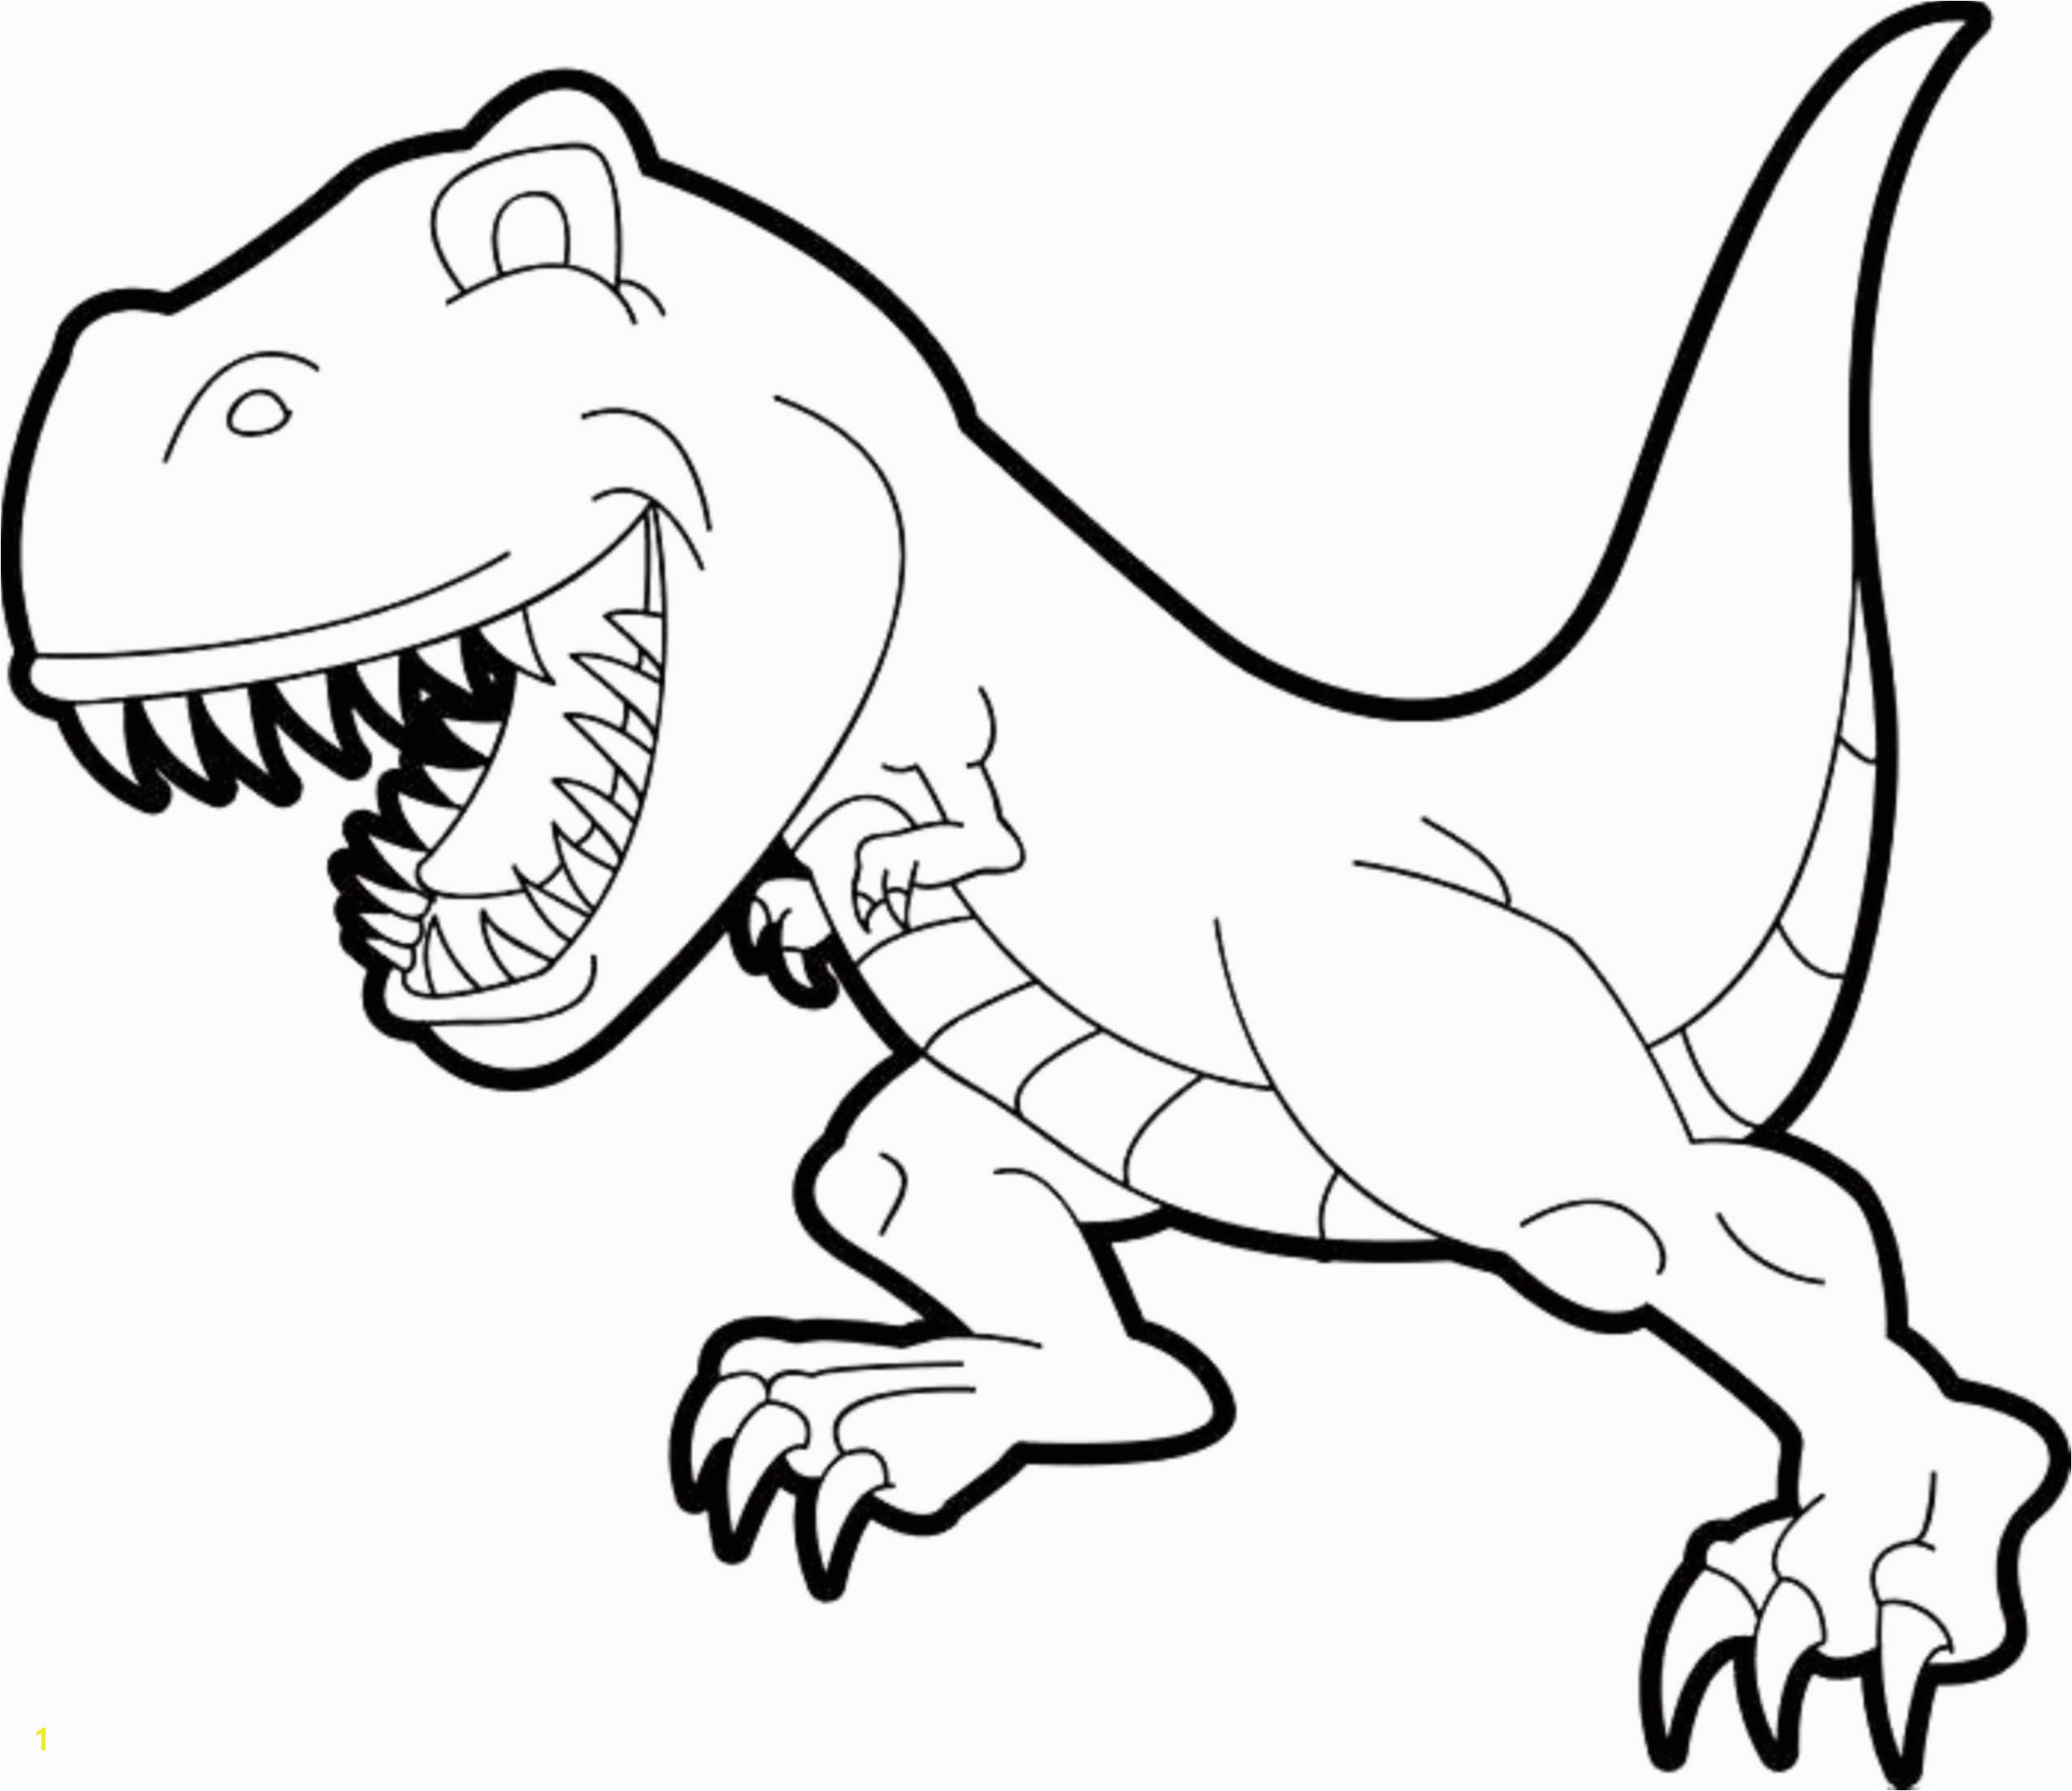 Labeled coloring pages dinosaurs t rex coloring pages of t rex dinosaurs t rex dinosaur coloring pages